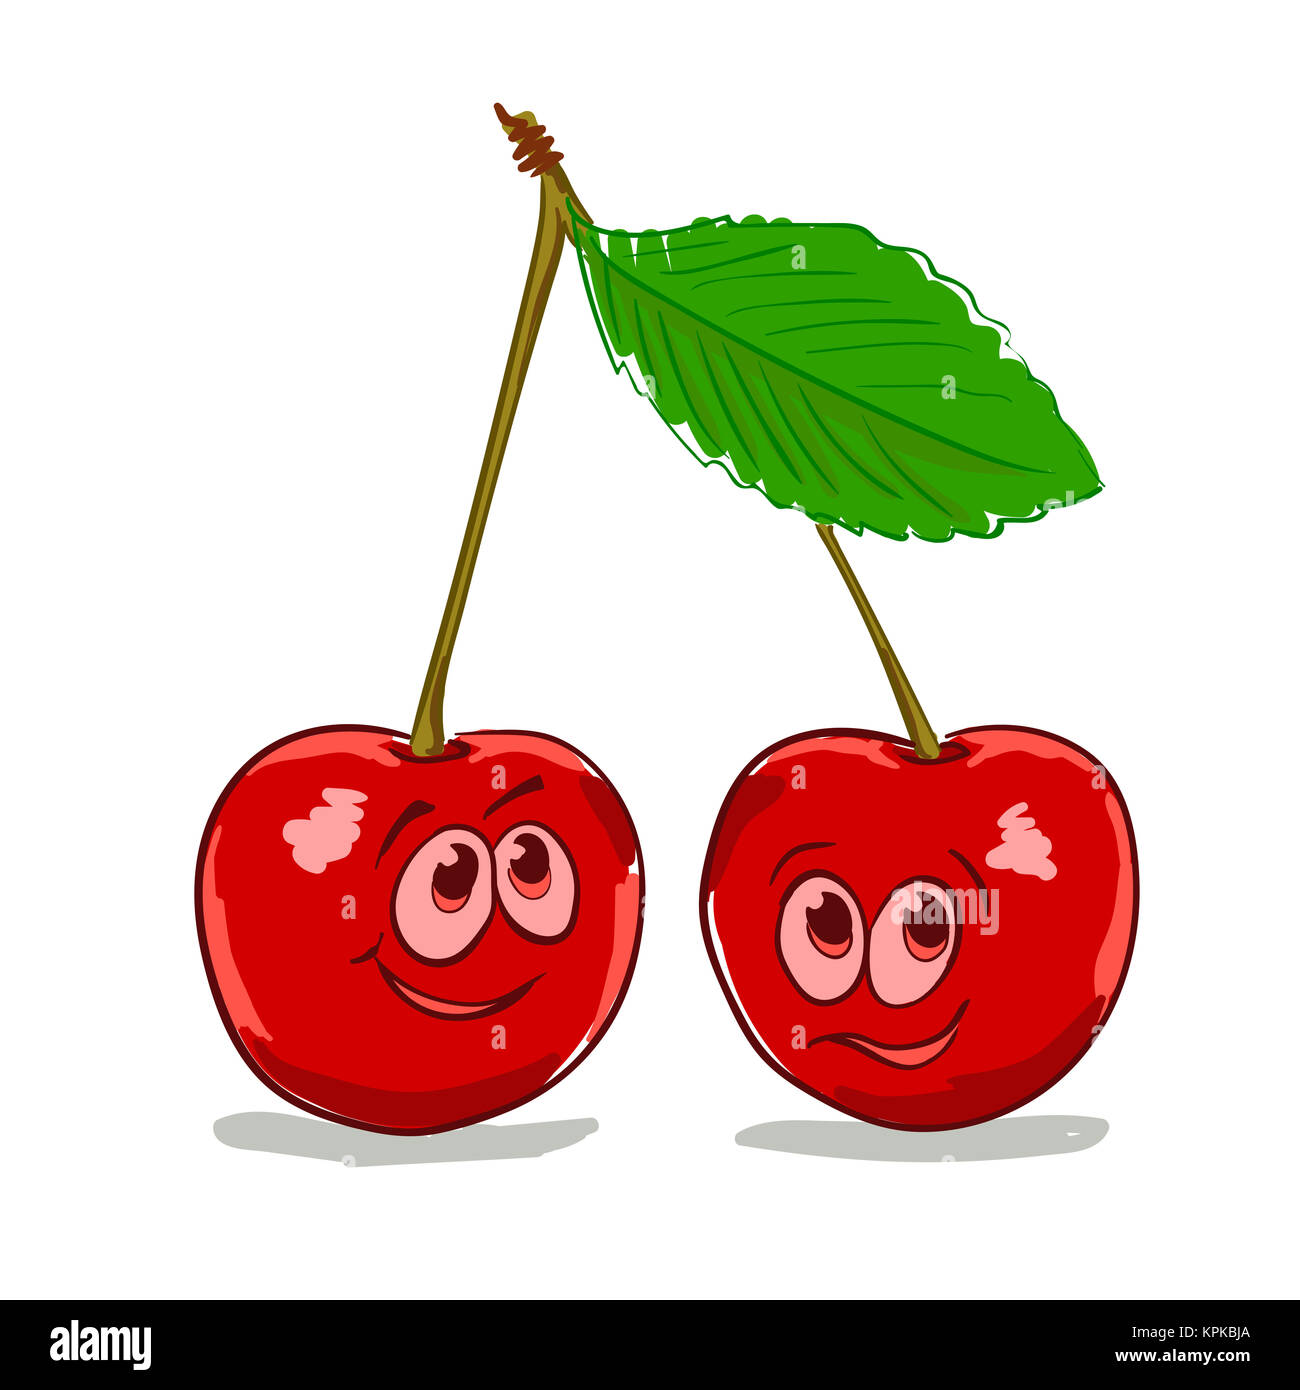 Cherry cartoon Cut Out Stock Images & Pictures - Alamy